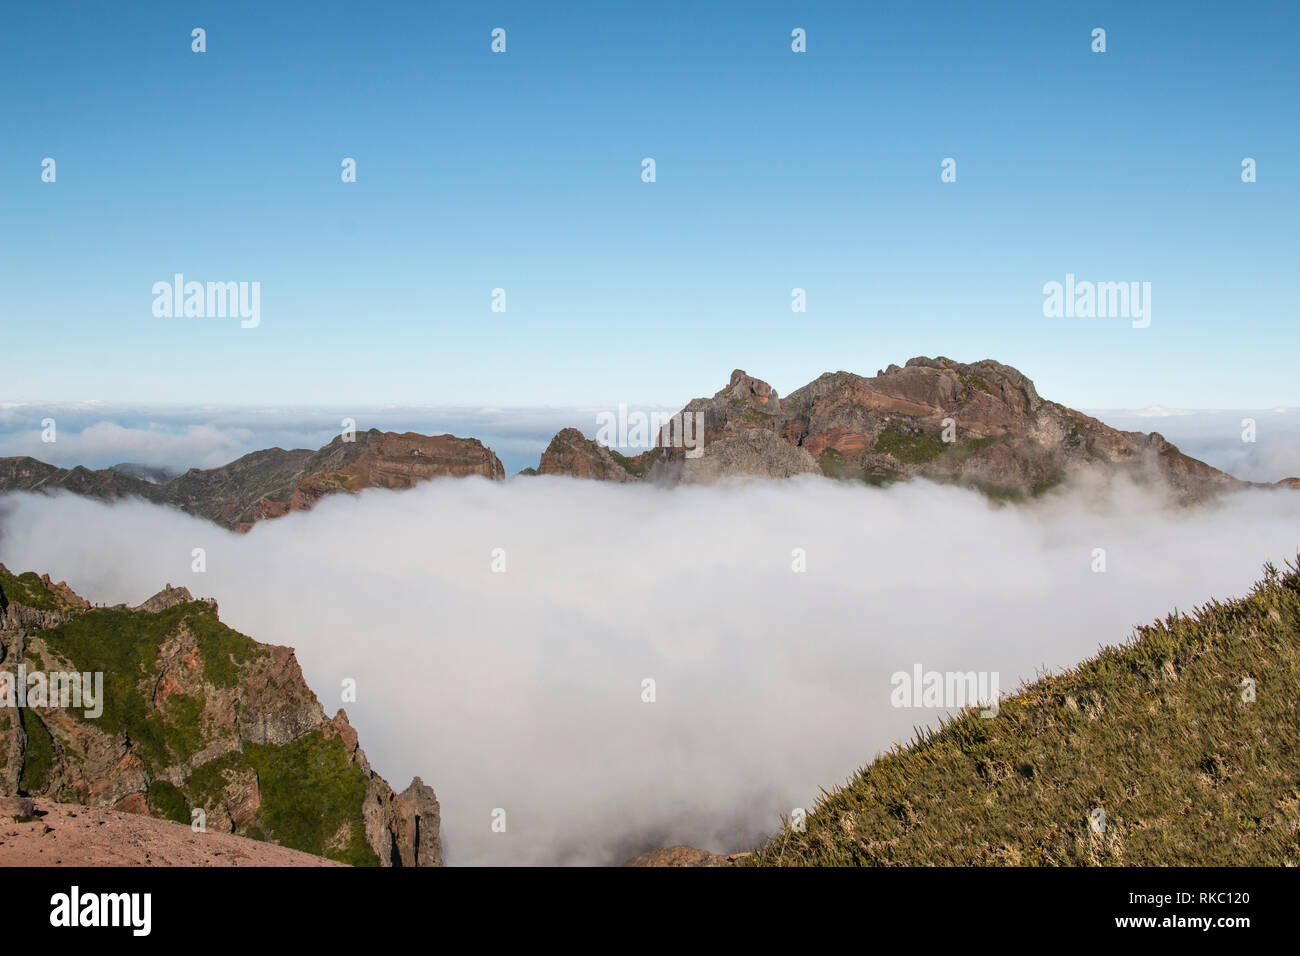 An image taken through the clouds at the top of a mountain range, Madeira, Portugal Stock Photo